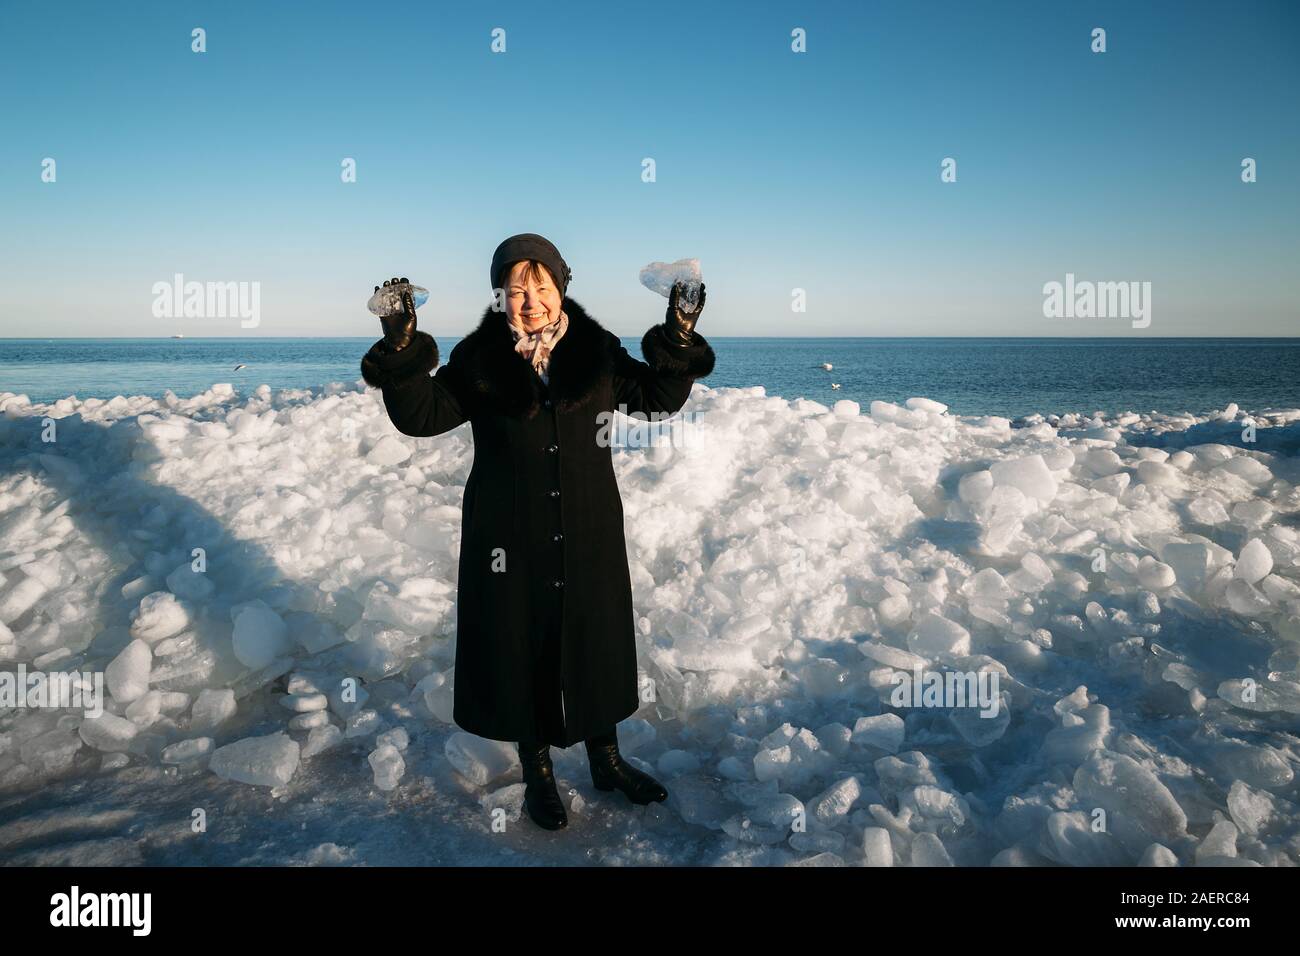 Senior smiling beautiful woman in black coat holding broken pieces of sea ice standing in front of hummocky ice Stock Photo